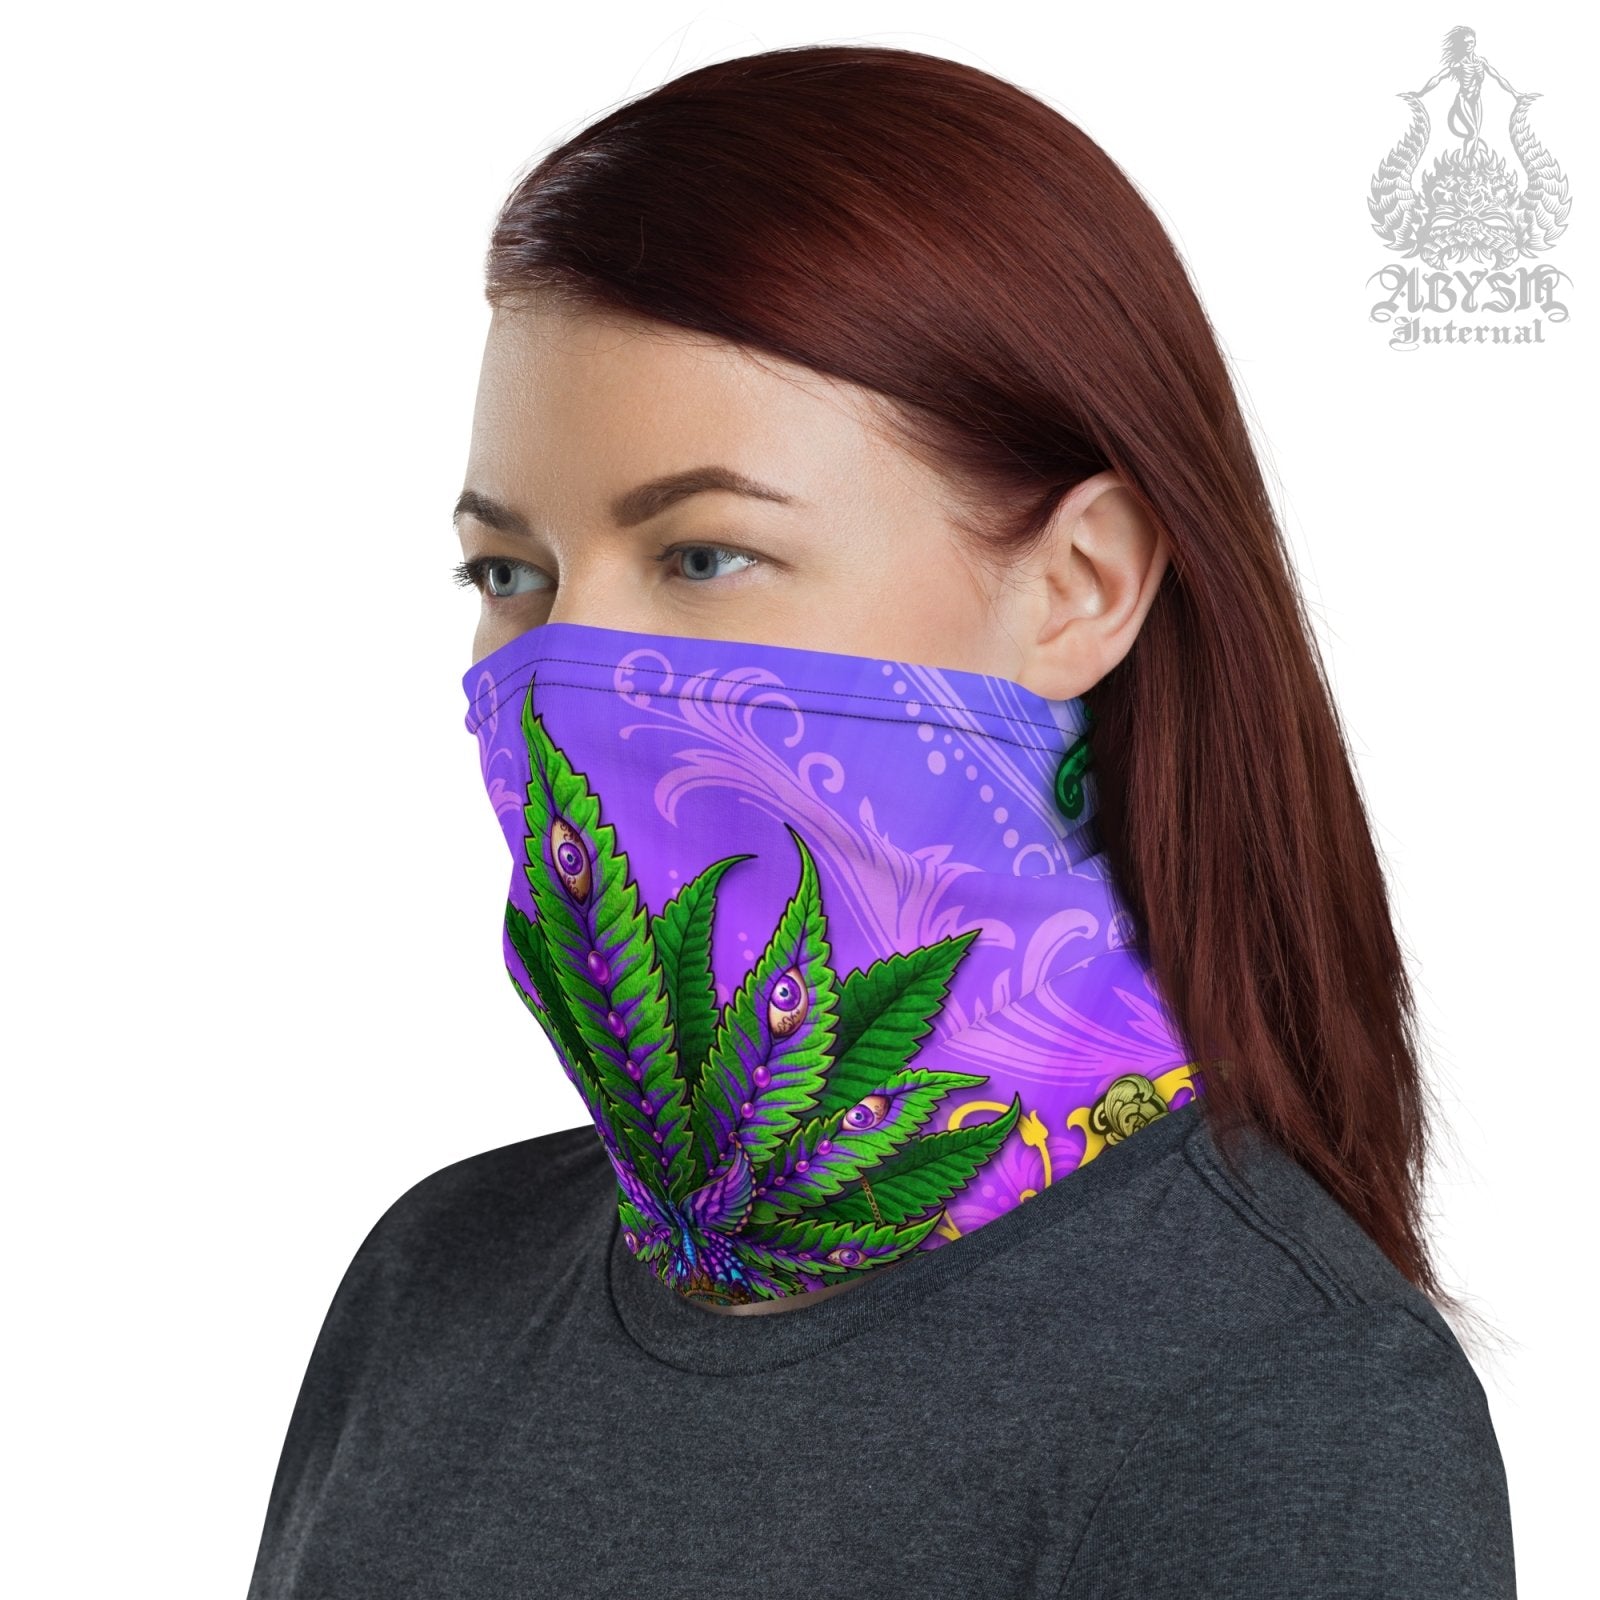 Cannabis Neck Gaiter, Weed Face Mask, Marijuana Head Covering, Indie Festival Outfit, 420 Gift - Nature - Abysm Internal